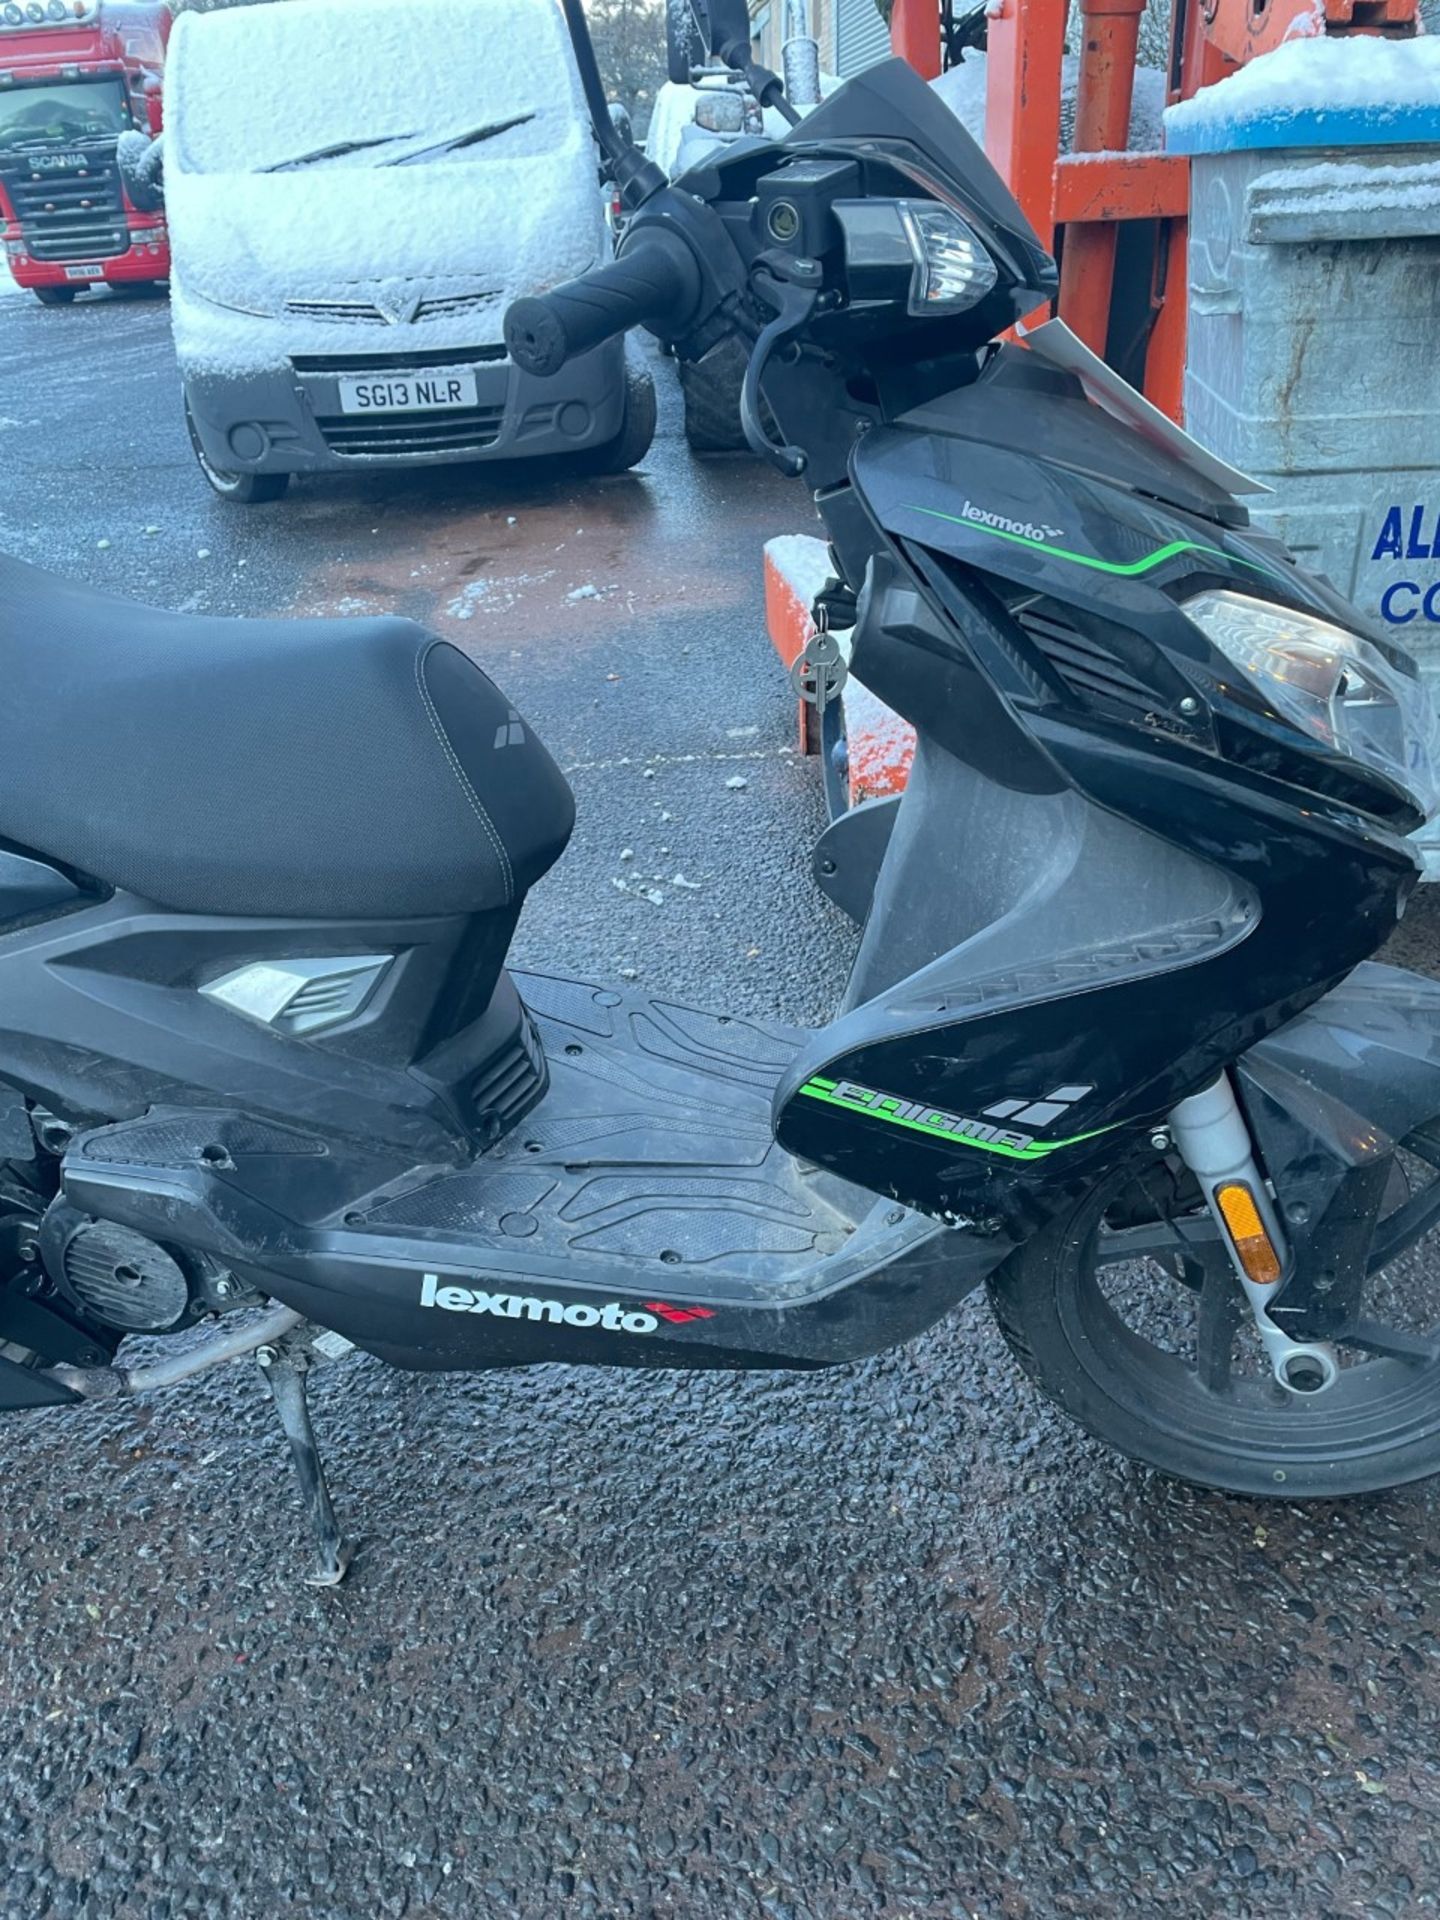 Leximoto enigma ZS 125 2021 model with 3486km on the clock. Good little moped, could do with a - Image 2 of 5